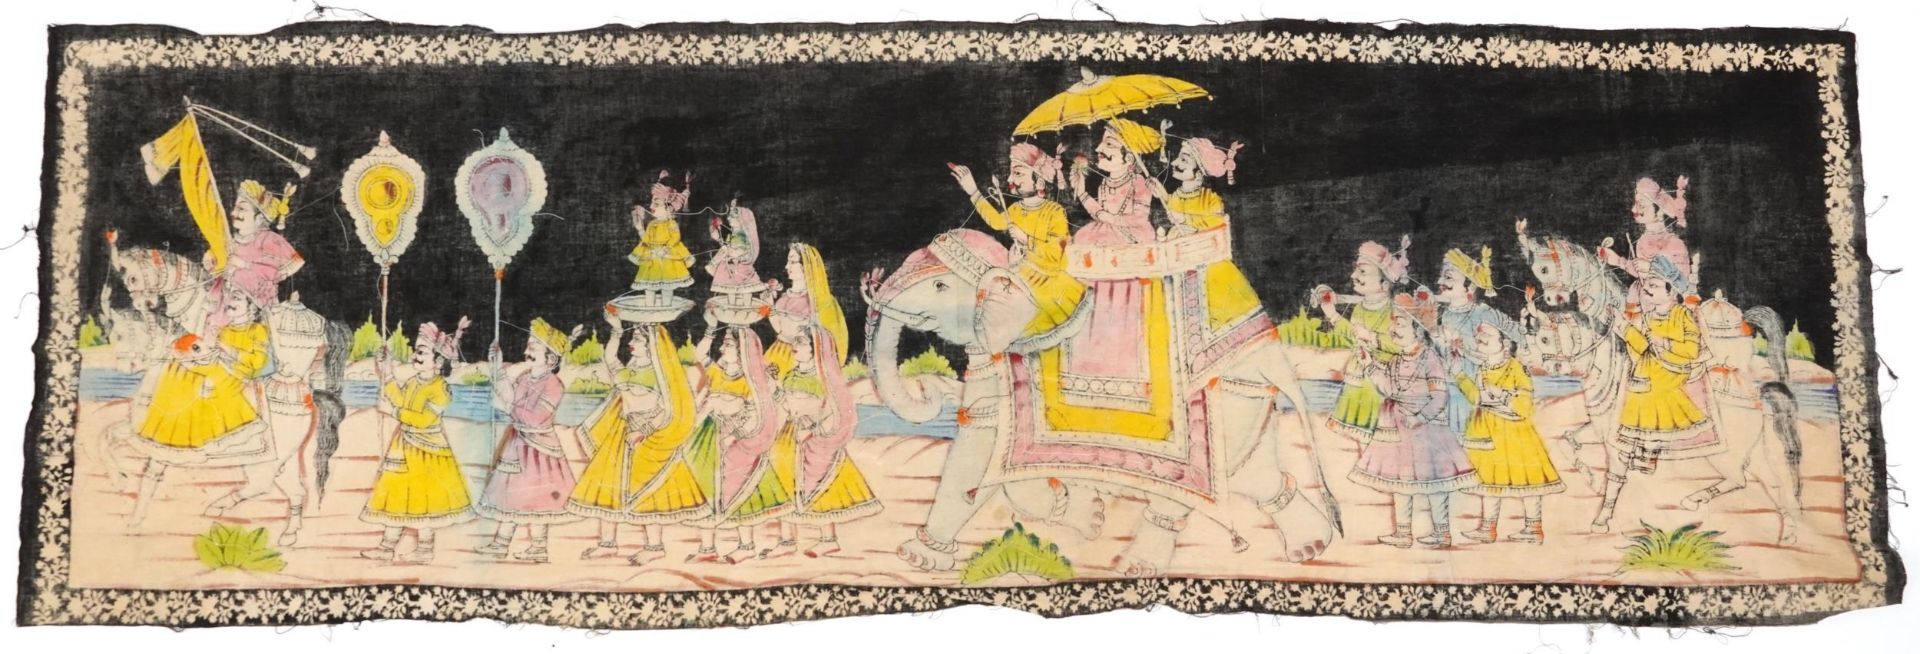 Indian sequinned textile depicting a mahout procession, 145cm x 54cm : For further information on - Image 2 of 2